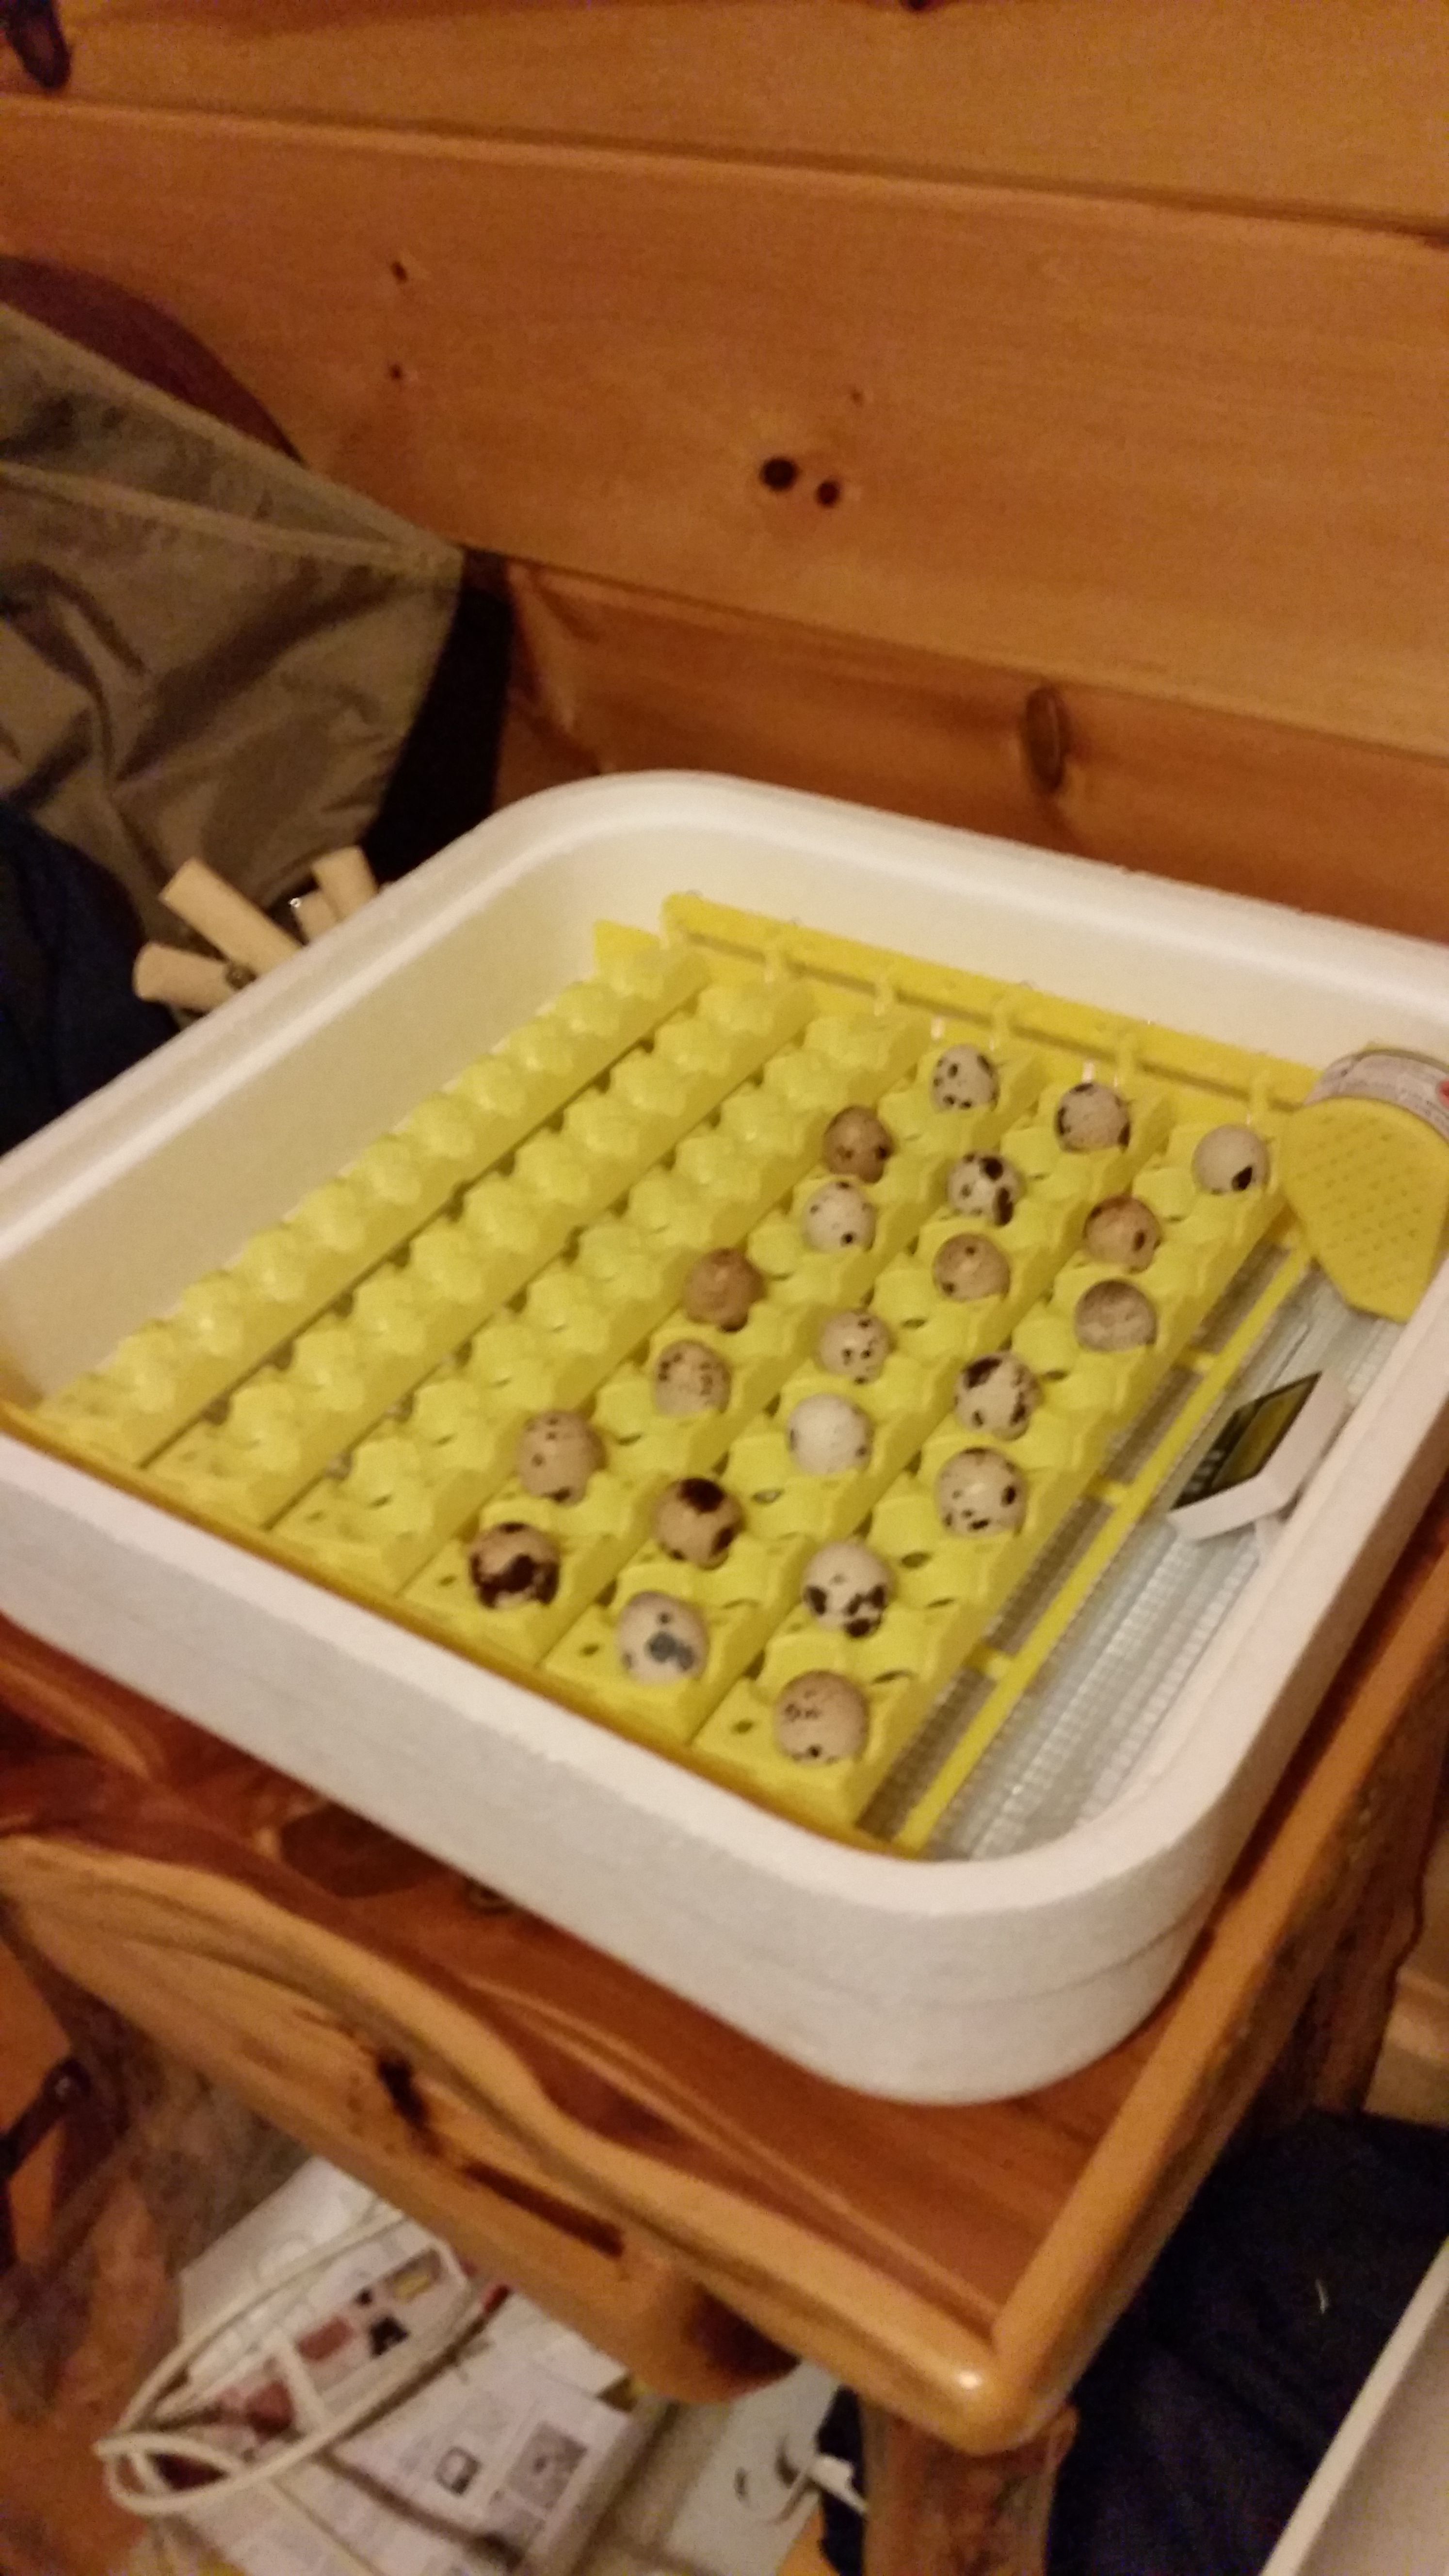 Jumbo coturnix quail eggs.  They do not fit properly in the quail egg automatic turner. 8 eggs were crushed whilst incubating